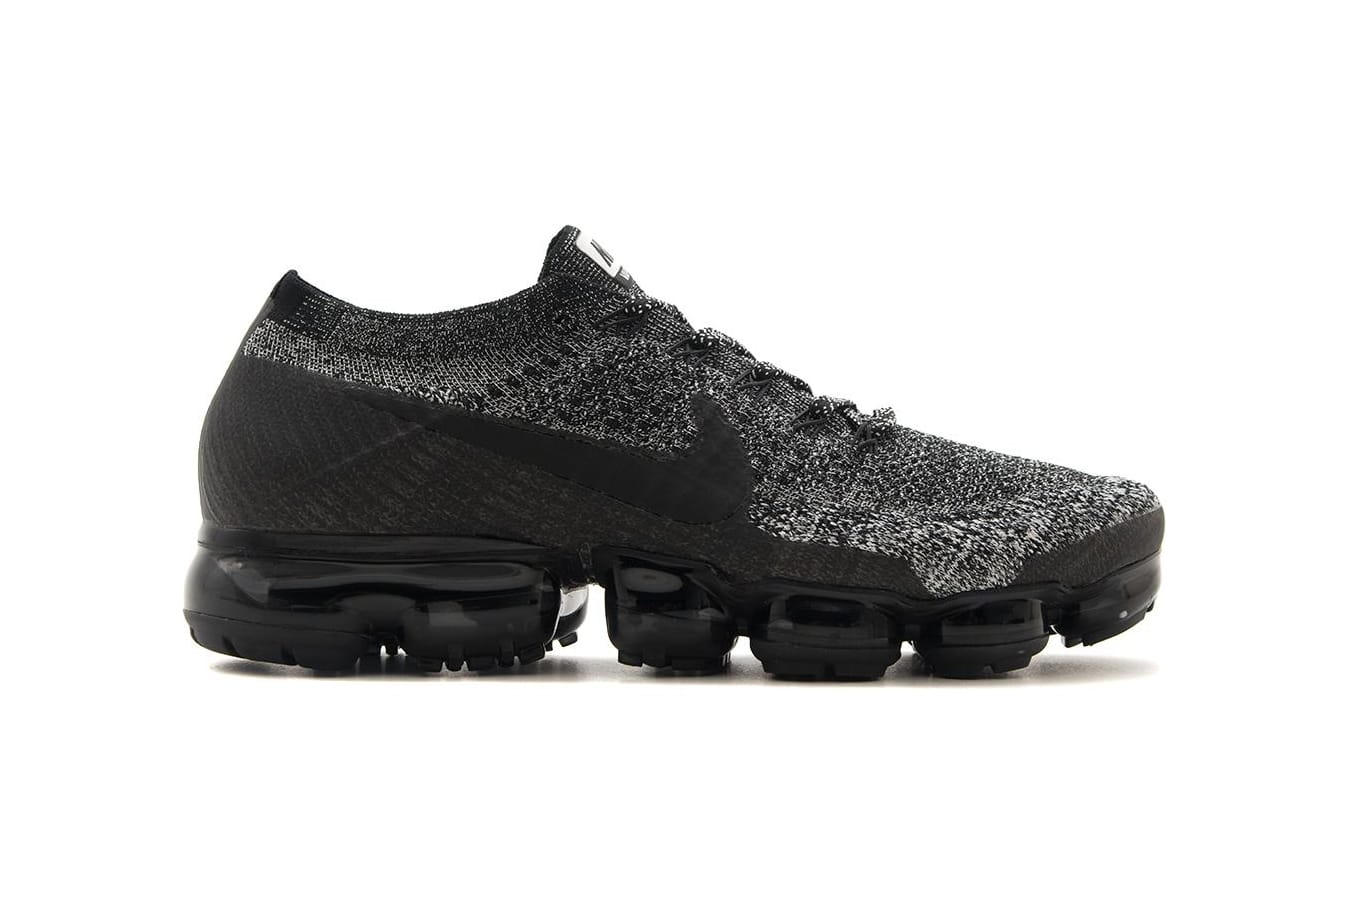 Nike Releases Fall-Ready Air VaporMax 